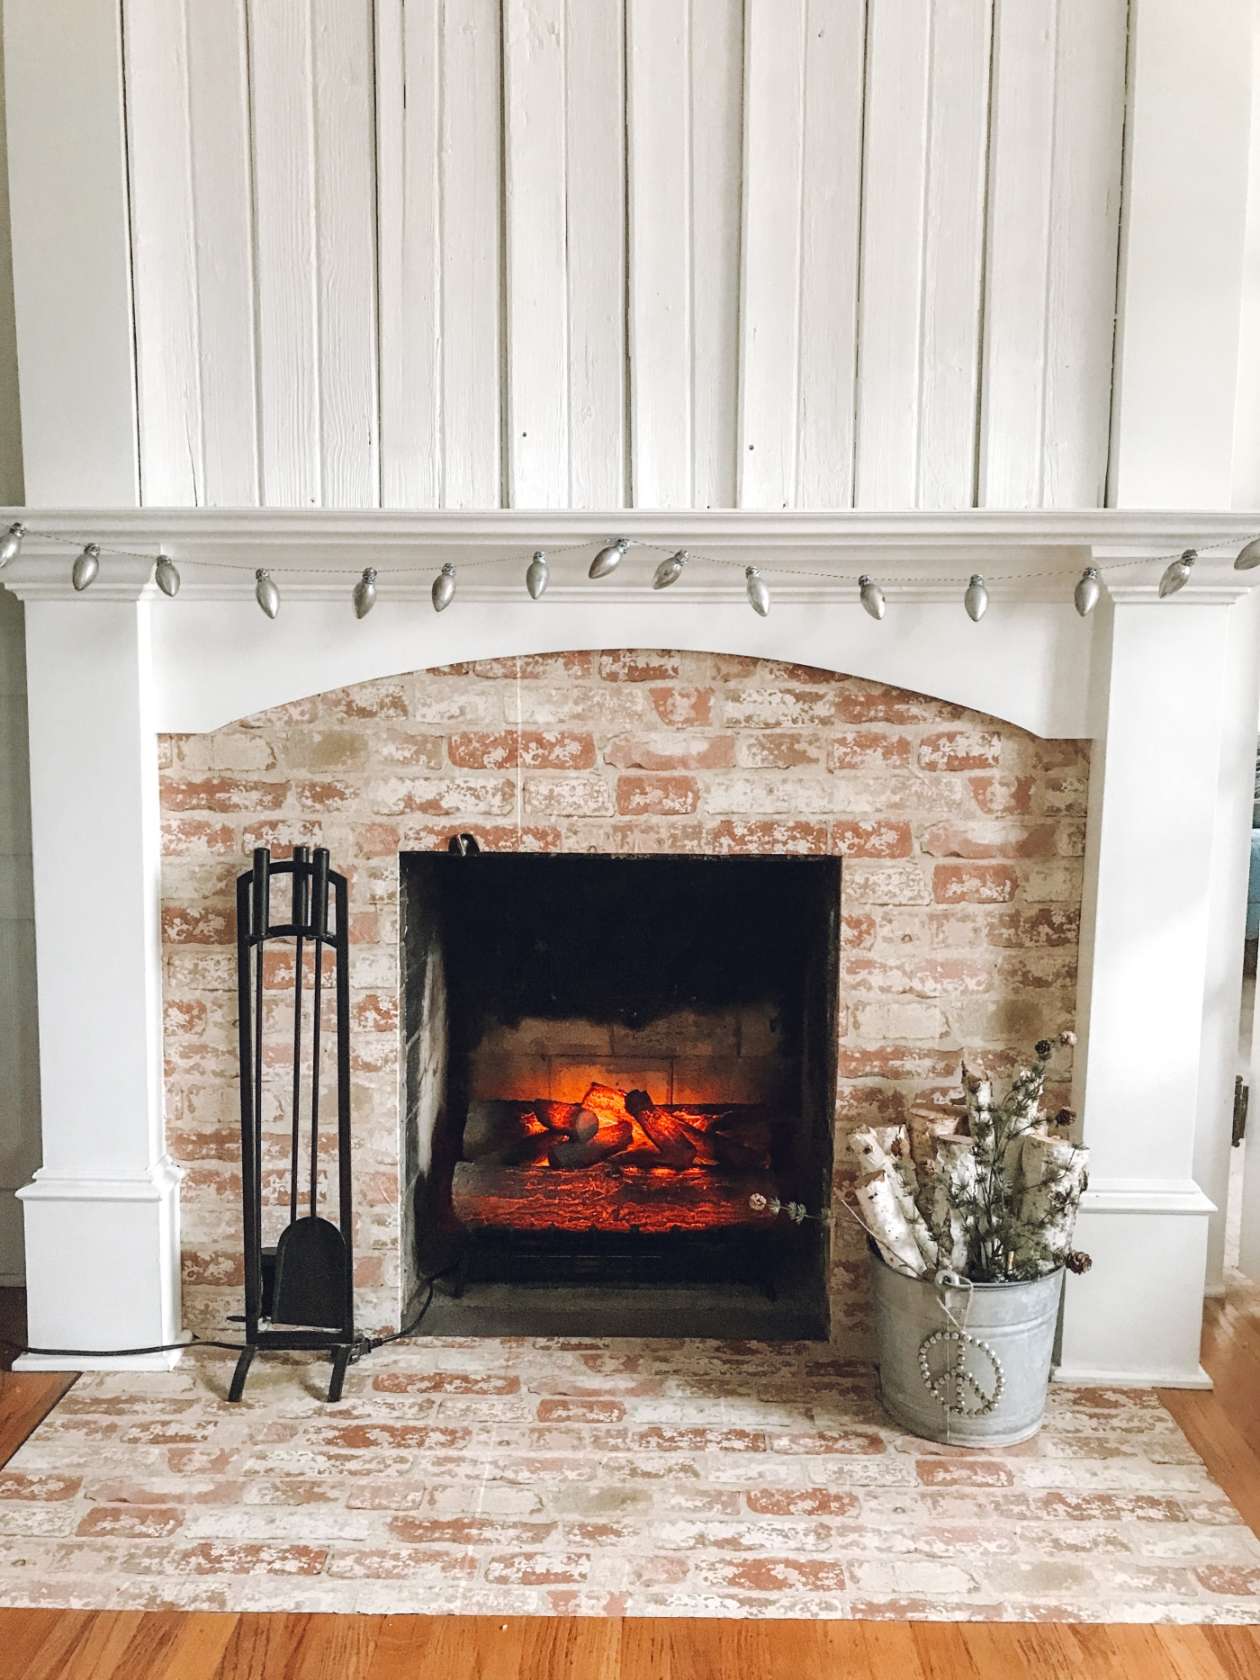 I Added Faux Brick Wallpaper to our Fireplace - The Wicker House